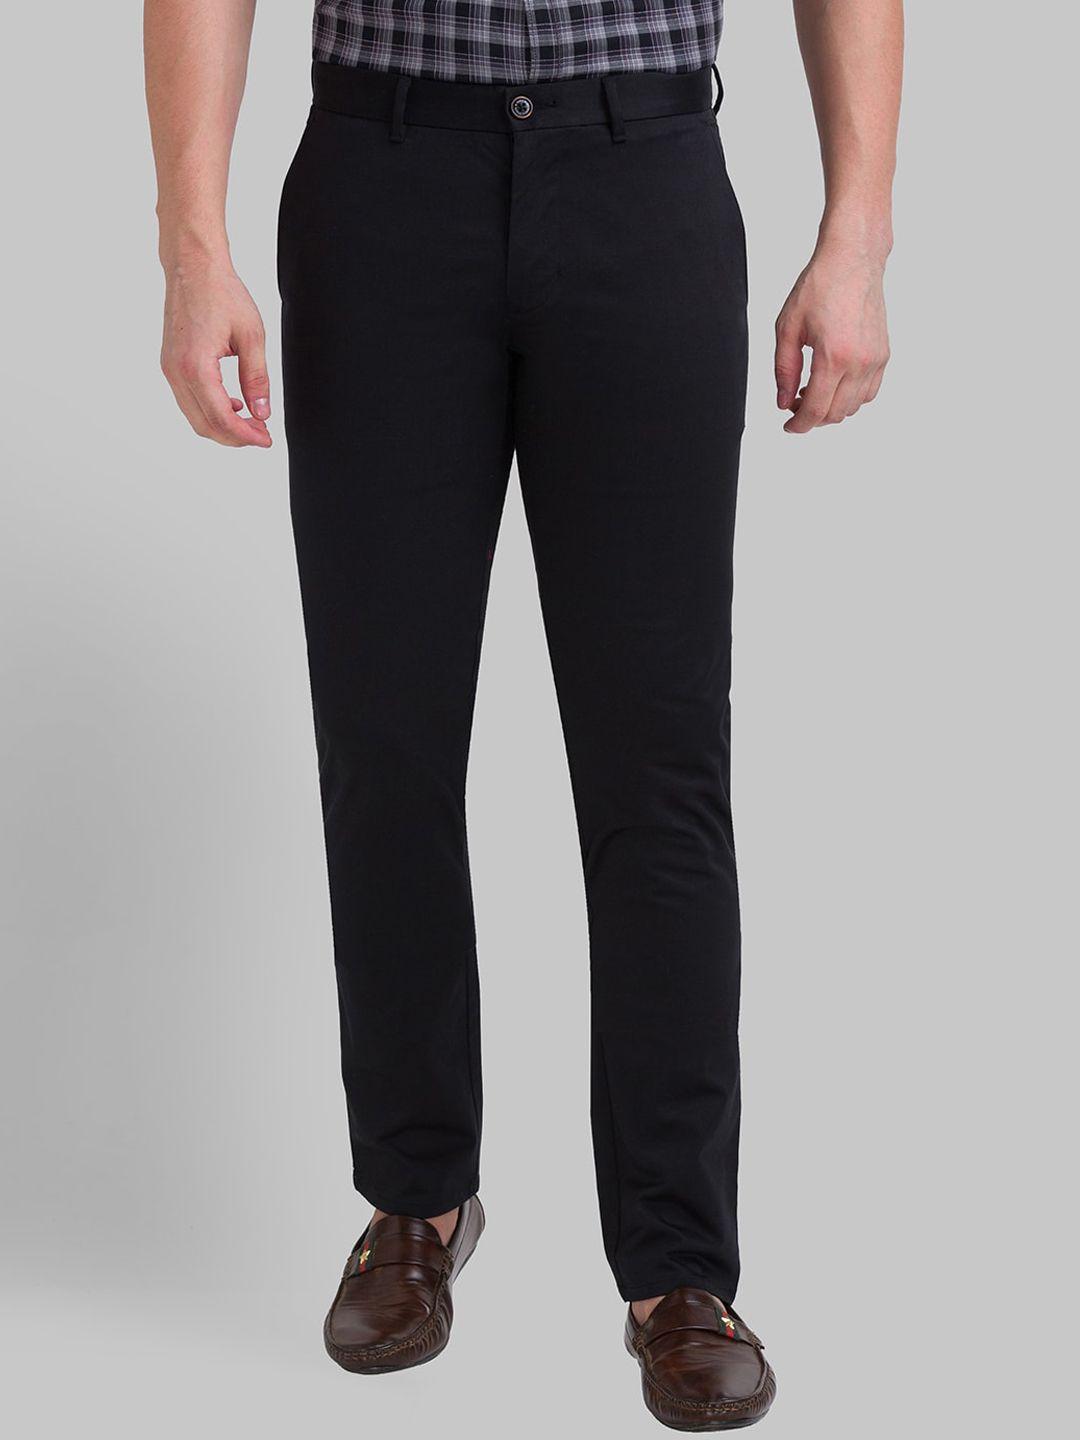 parx men black tapered fit trousers